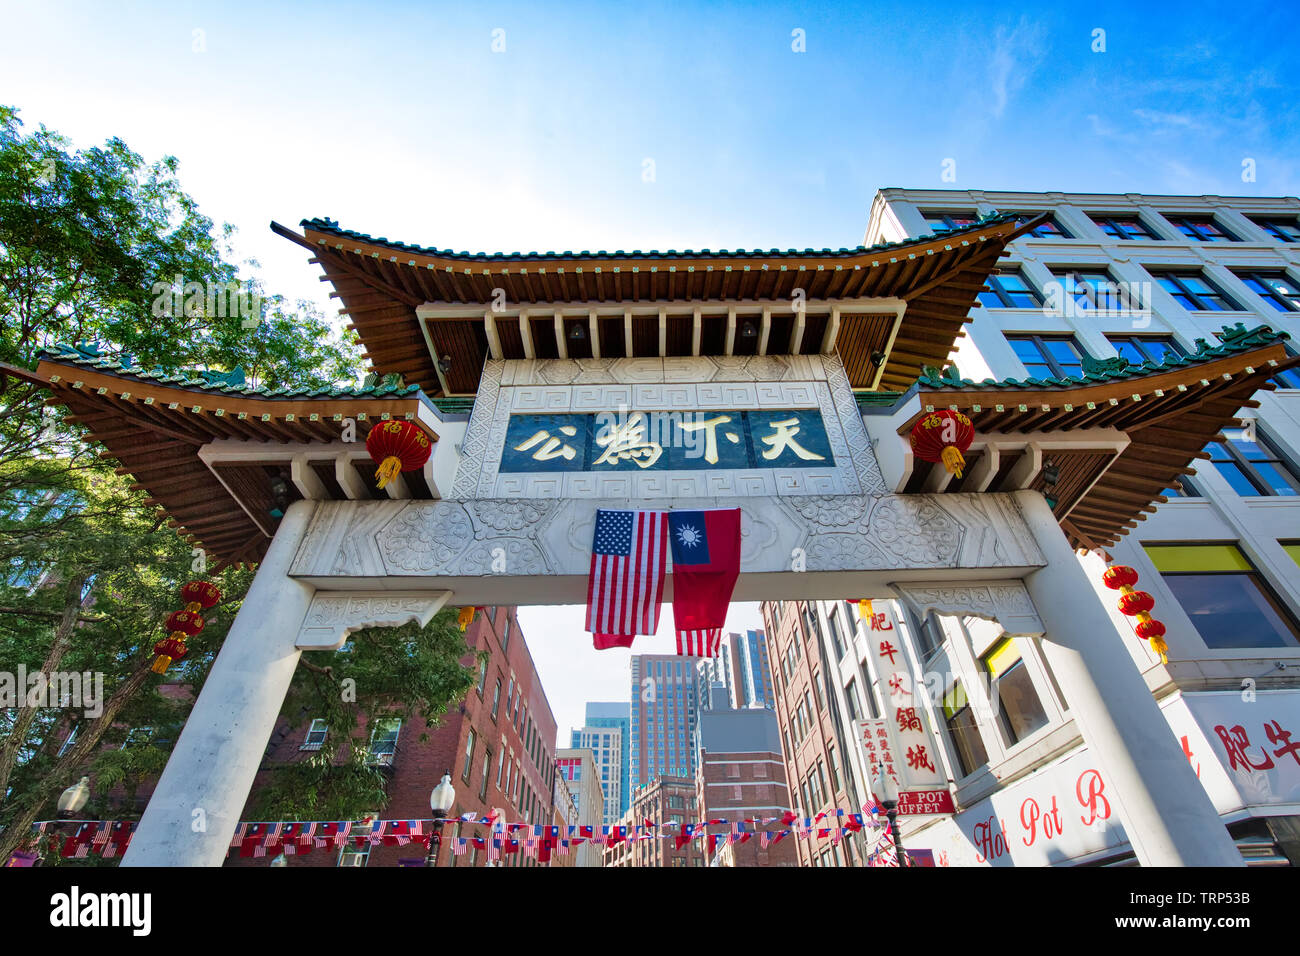 Boston, Ma, USA - October 20, 2018: Entrance to Boston Chinatown, the only surviving historic ethnic Chinese enclave in New England Stock Photo